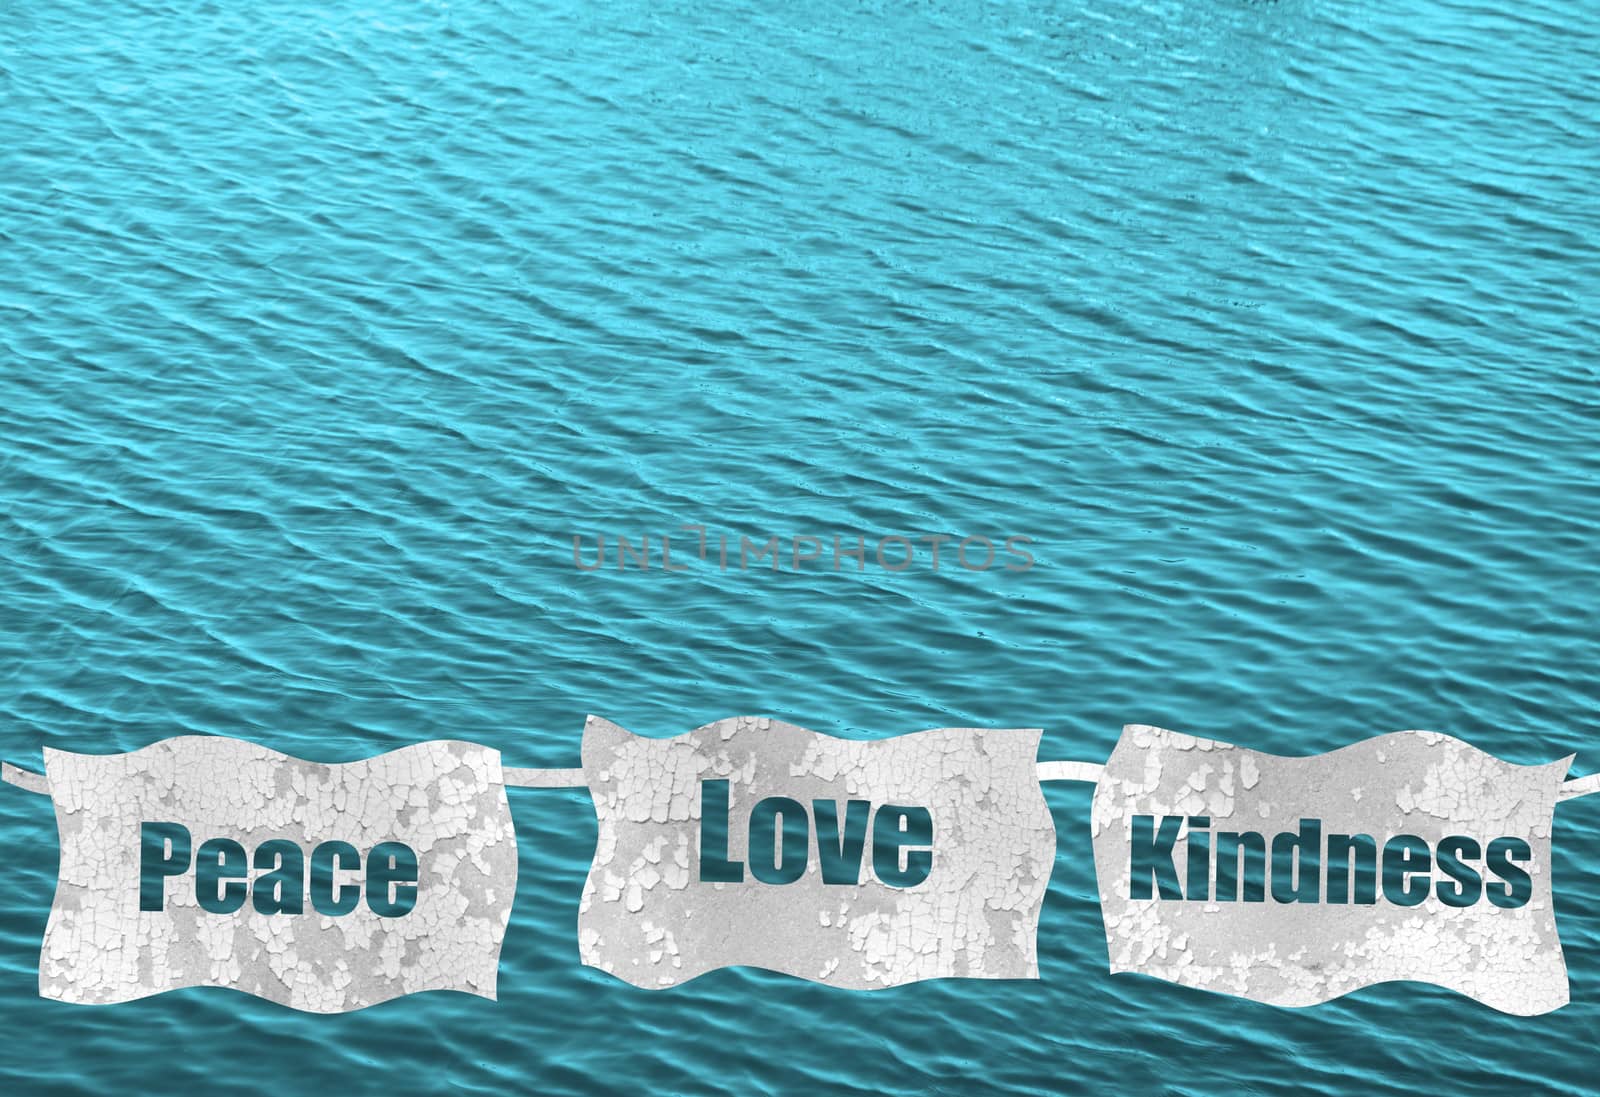 peace, love and kindness on ocean background by ftlaudgirl